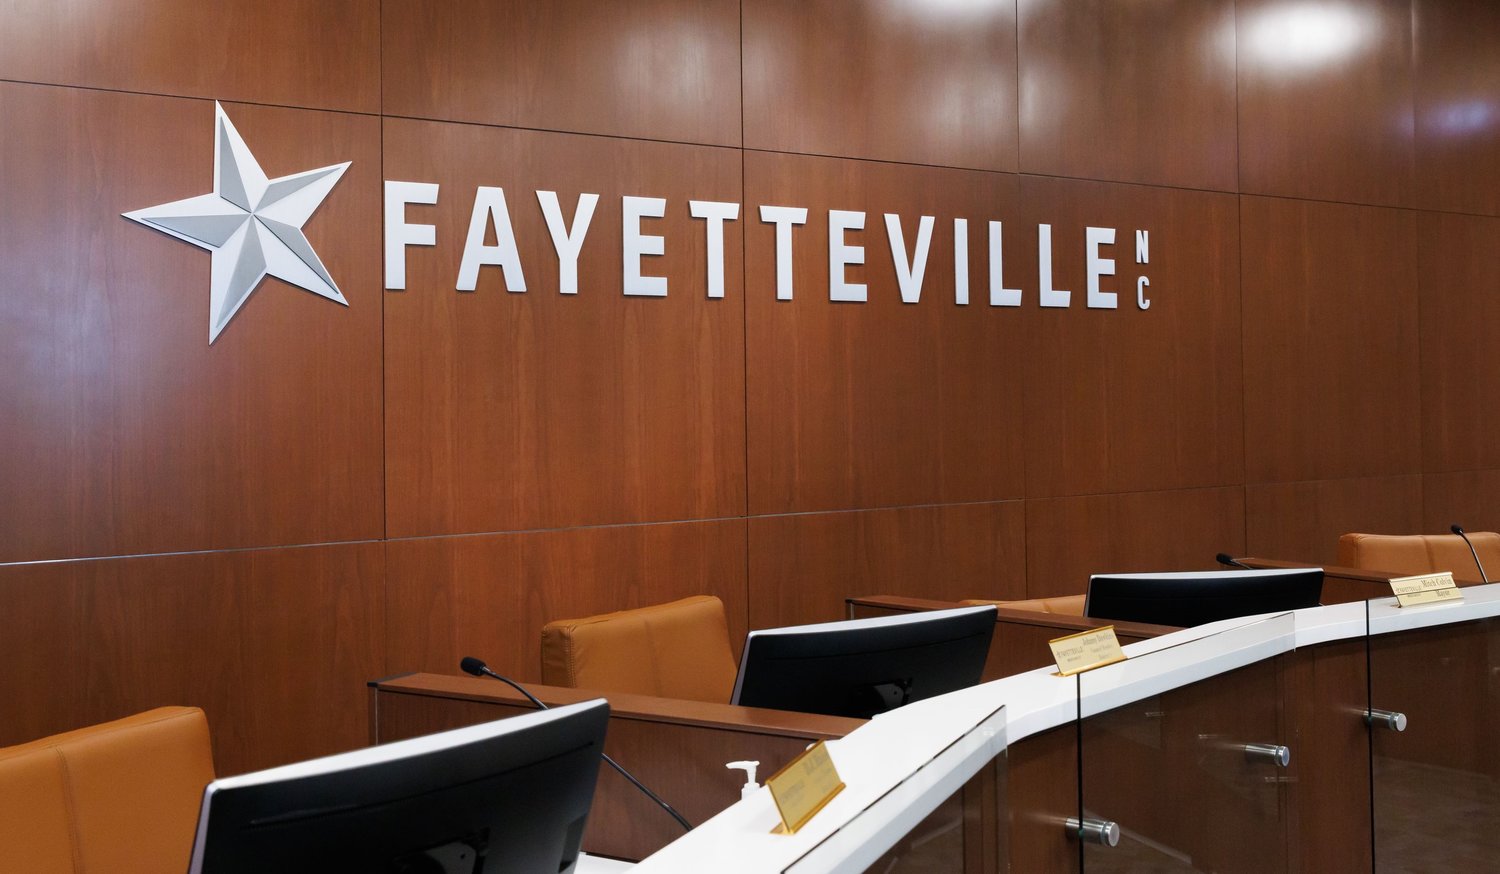 The Fayetteville City Council on Monday will meet and consider its appointment to the Public Works Commission.